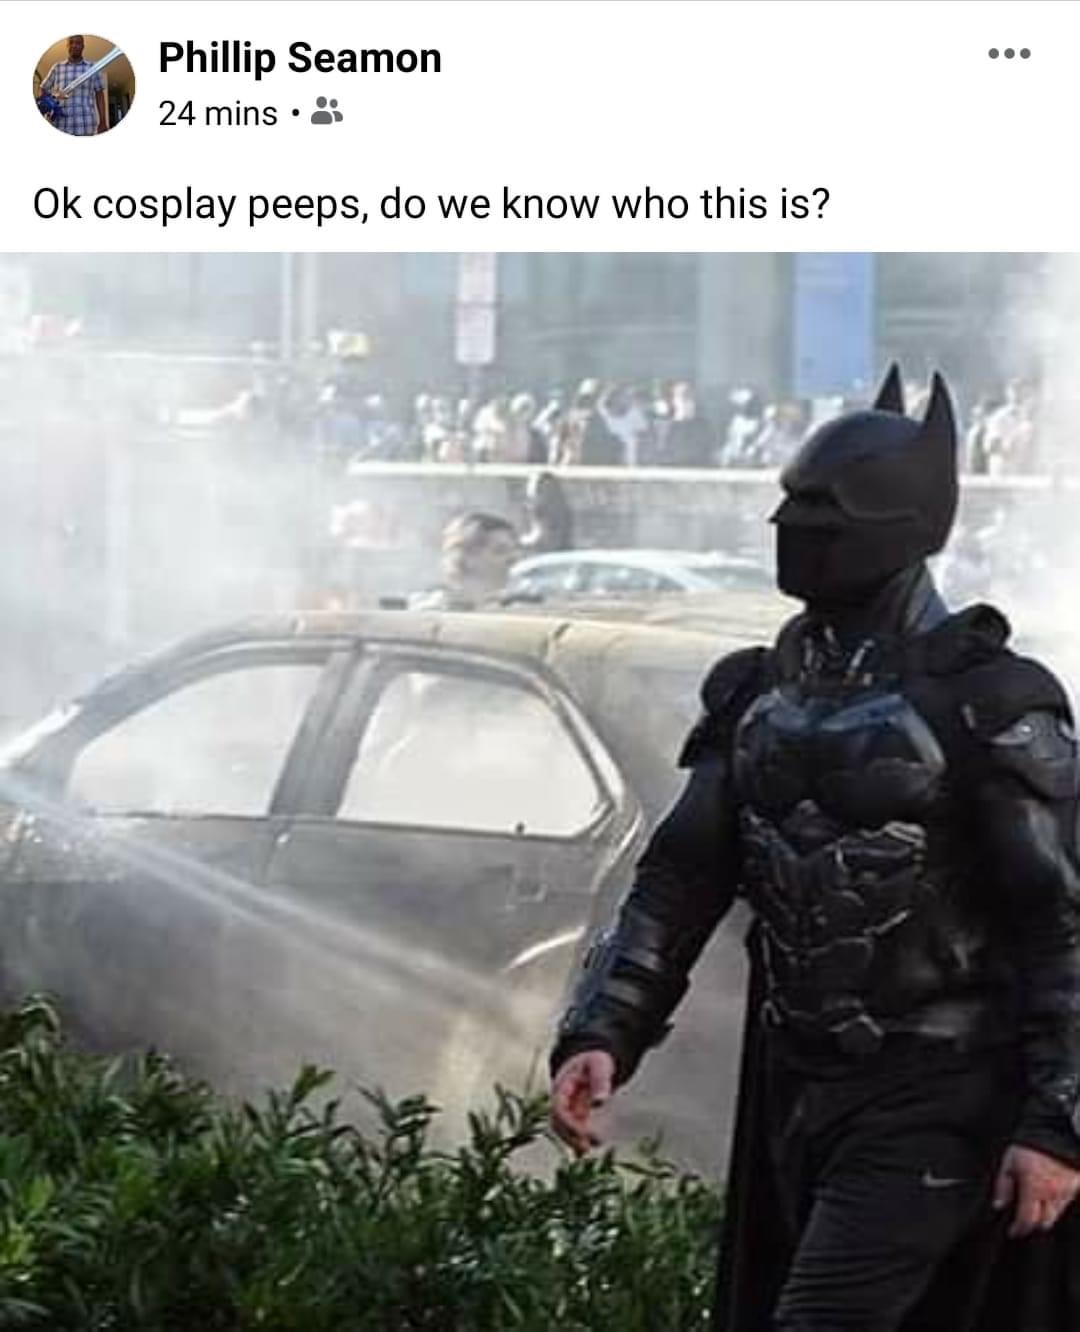 photo caption - Phillip Seamon 24 mins Ok cosplay peeps, do we know who this is?